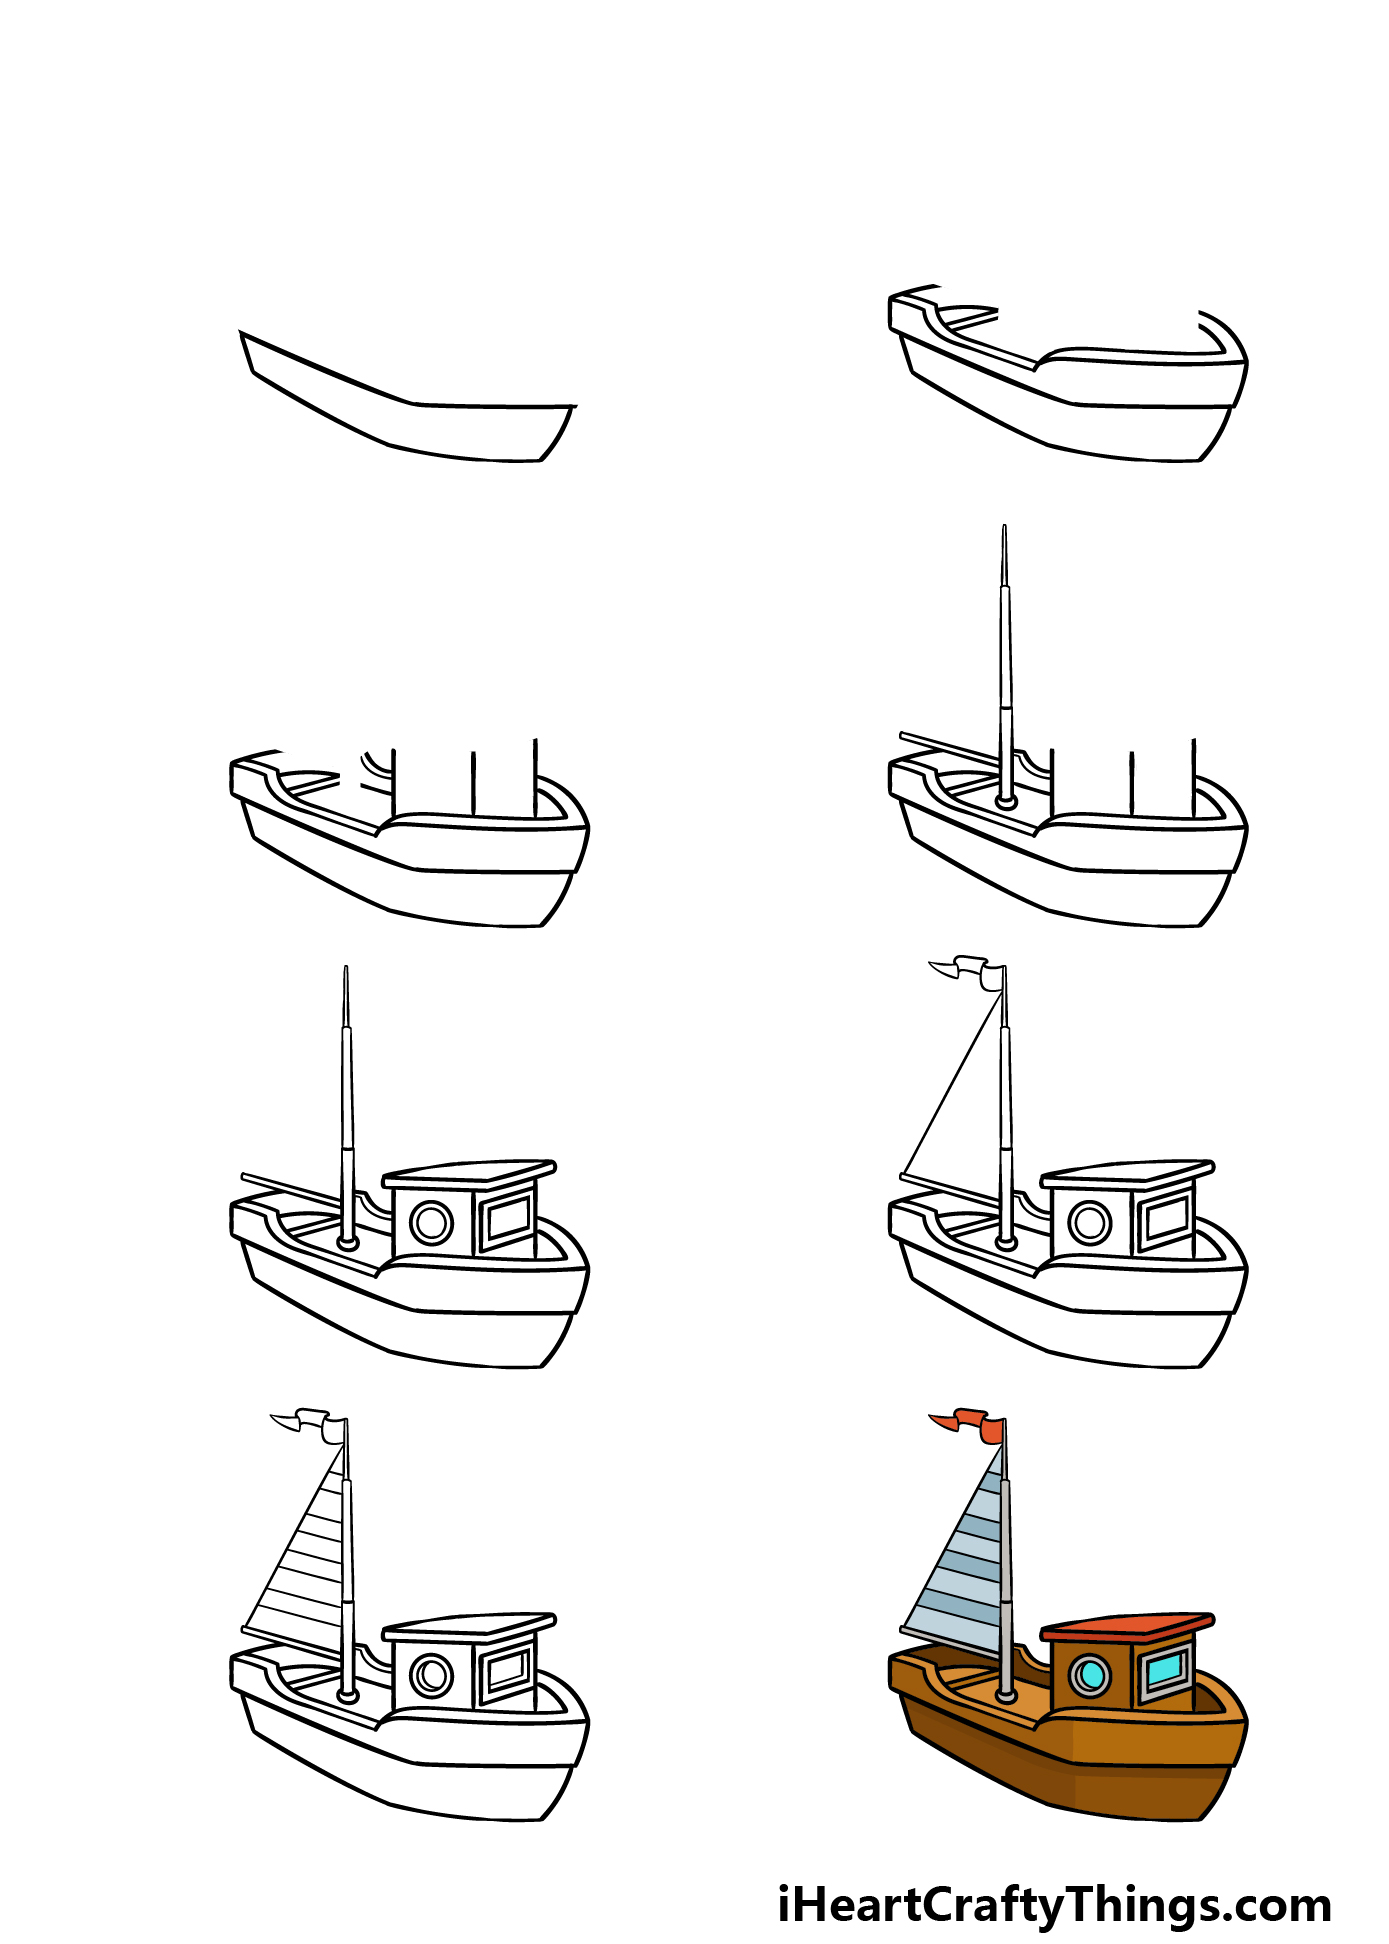 how to draw a cartoon boat in 8 steps